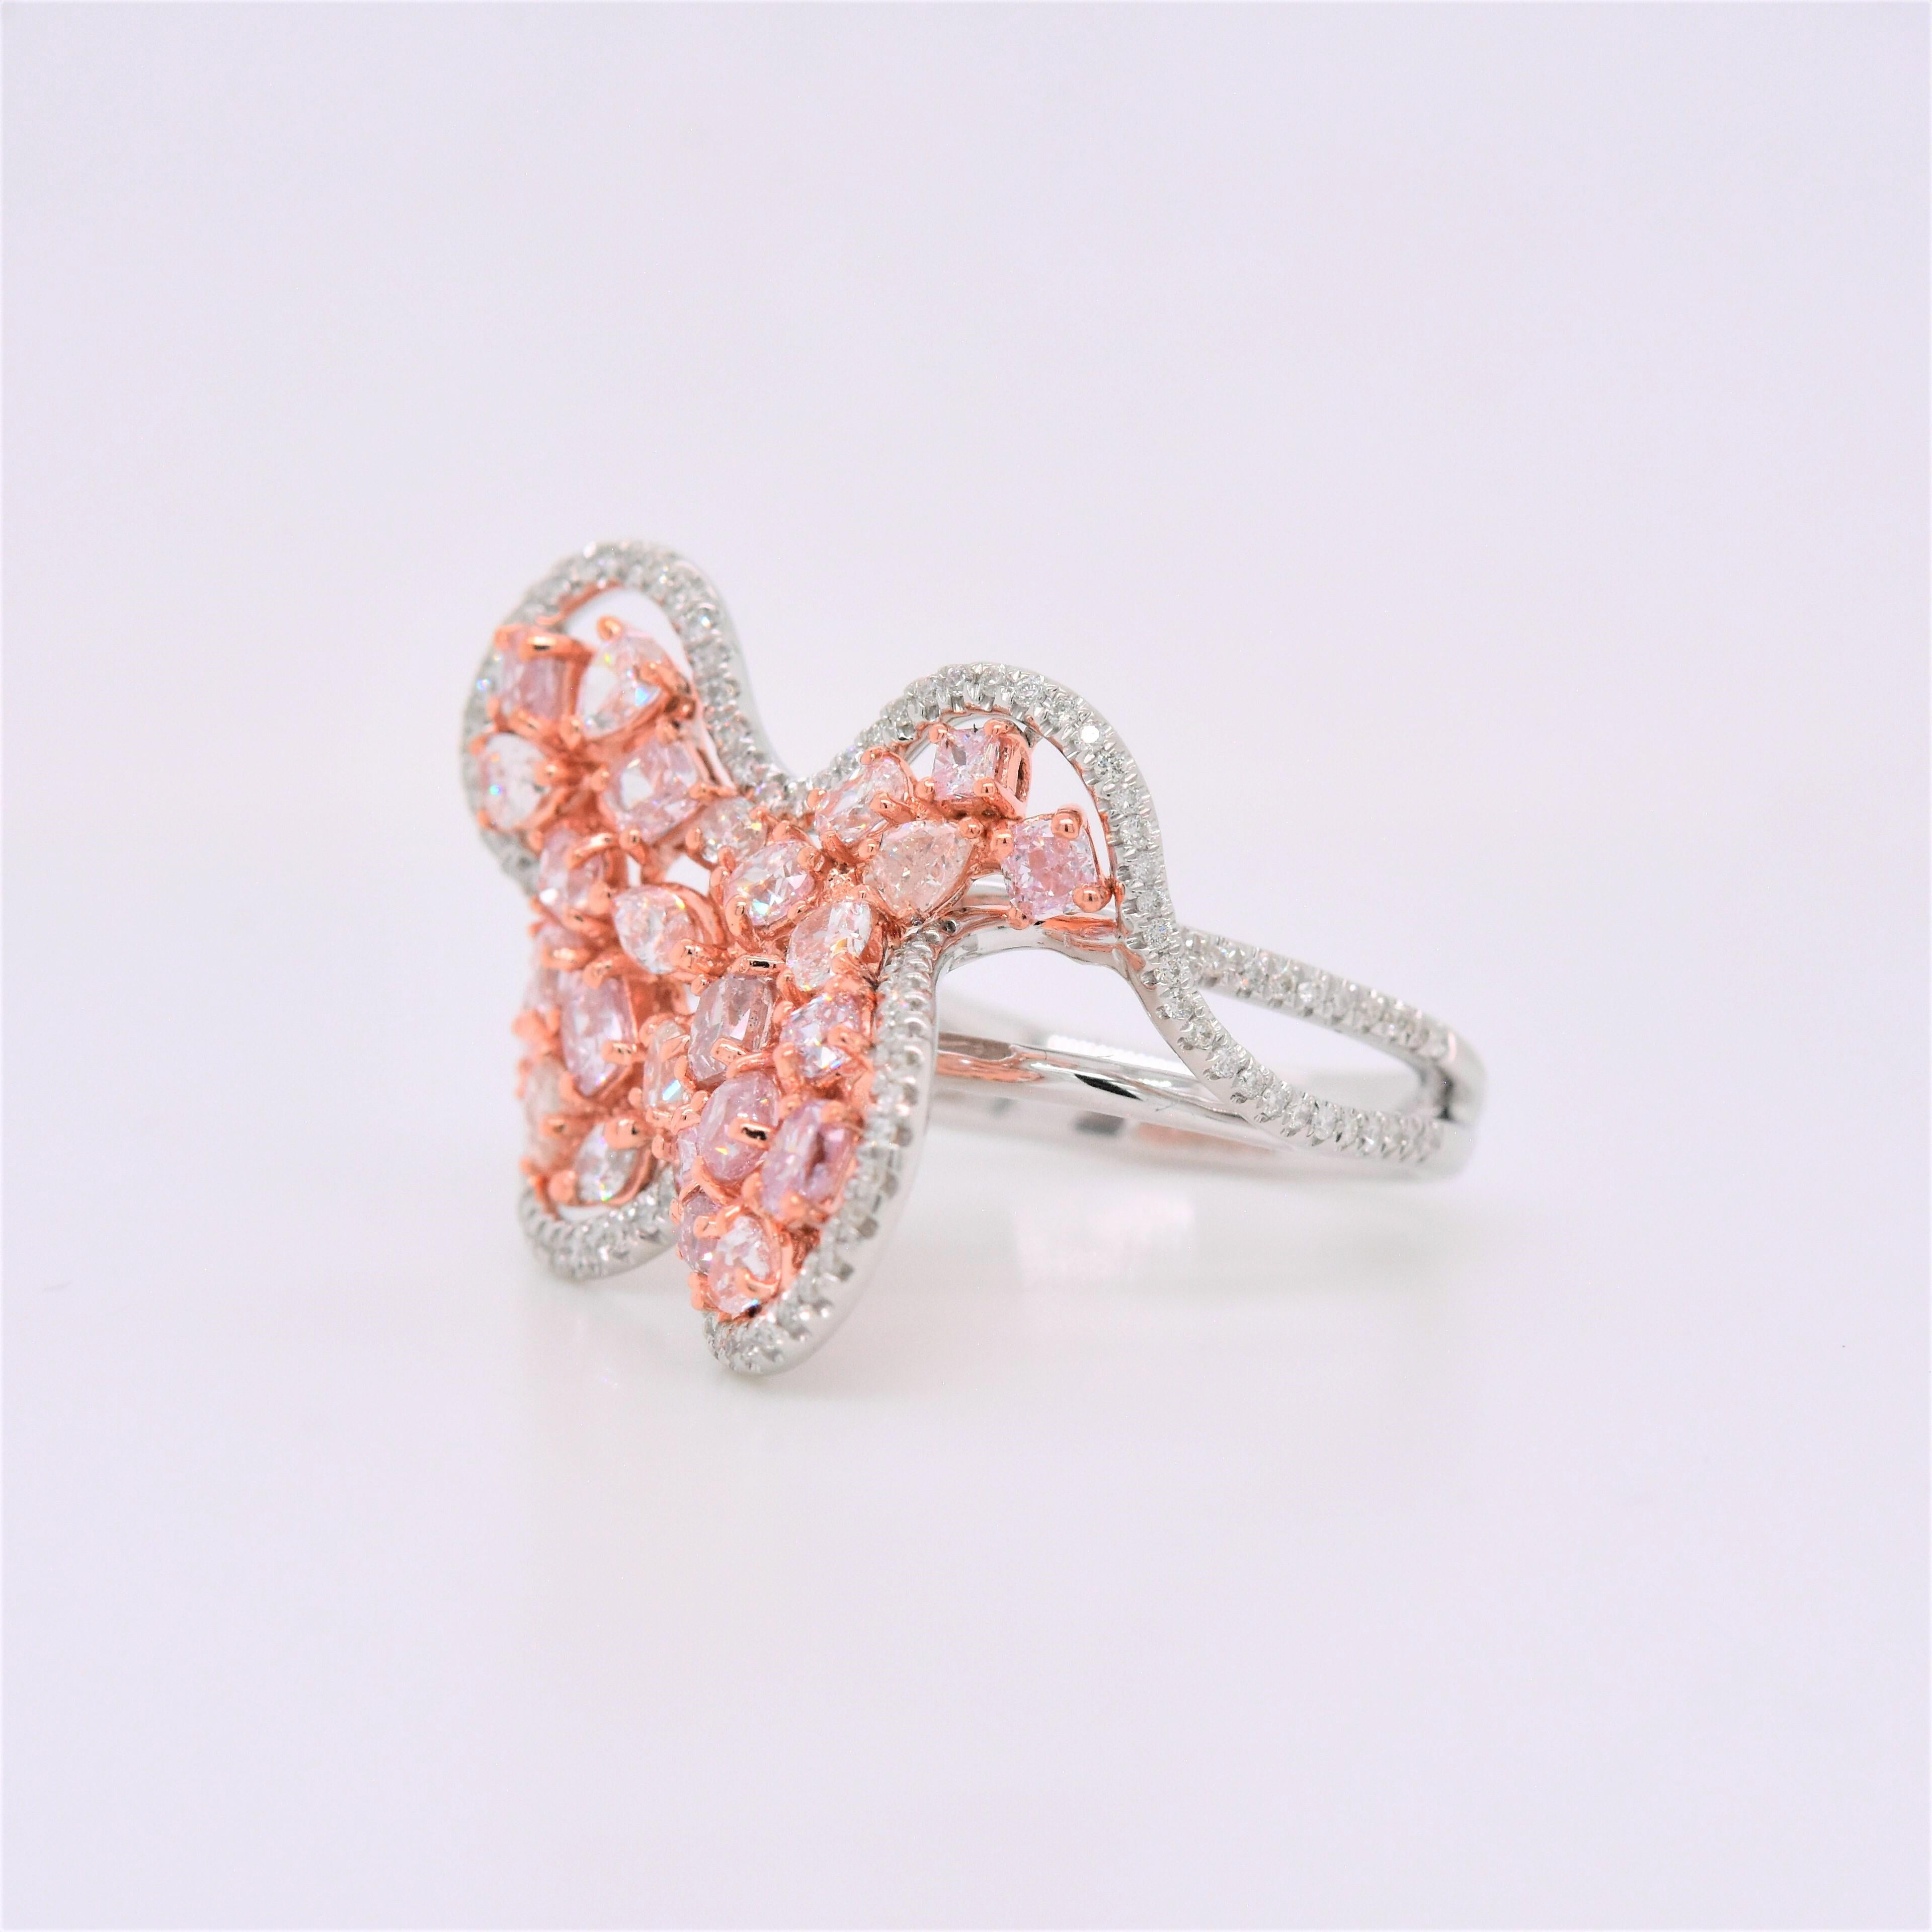 This sparkling diamond ring is an absolute delight to own. It showcases free shape motifs embellished with pavé-set with Natural Pink Diamonds sitting at the center of an elegant bypass shank. A dazzling set of round diamonds adds to the luxurious